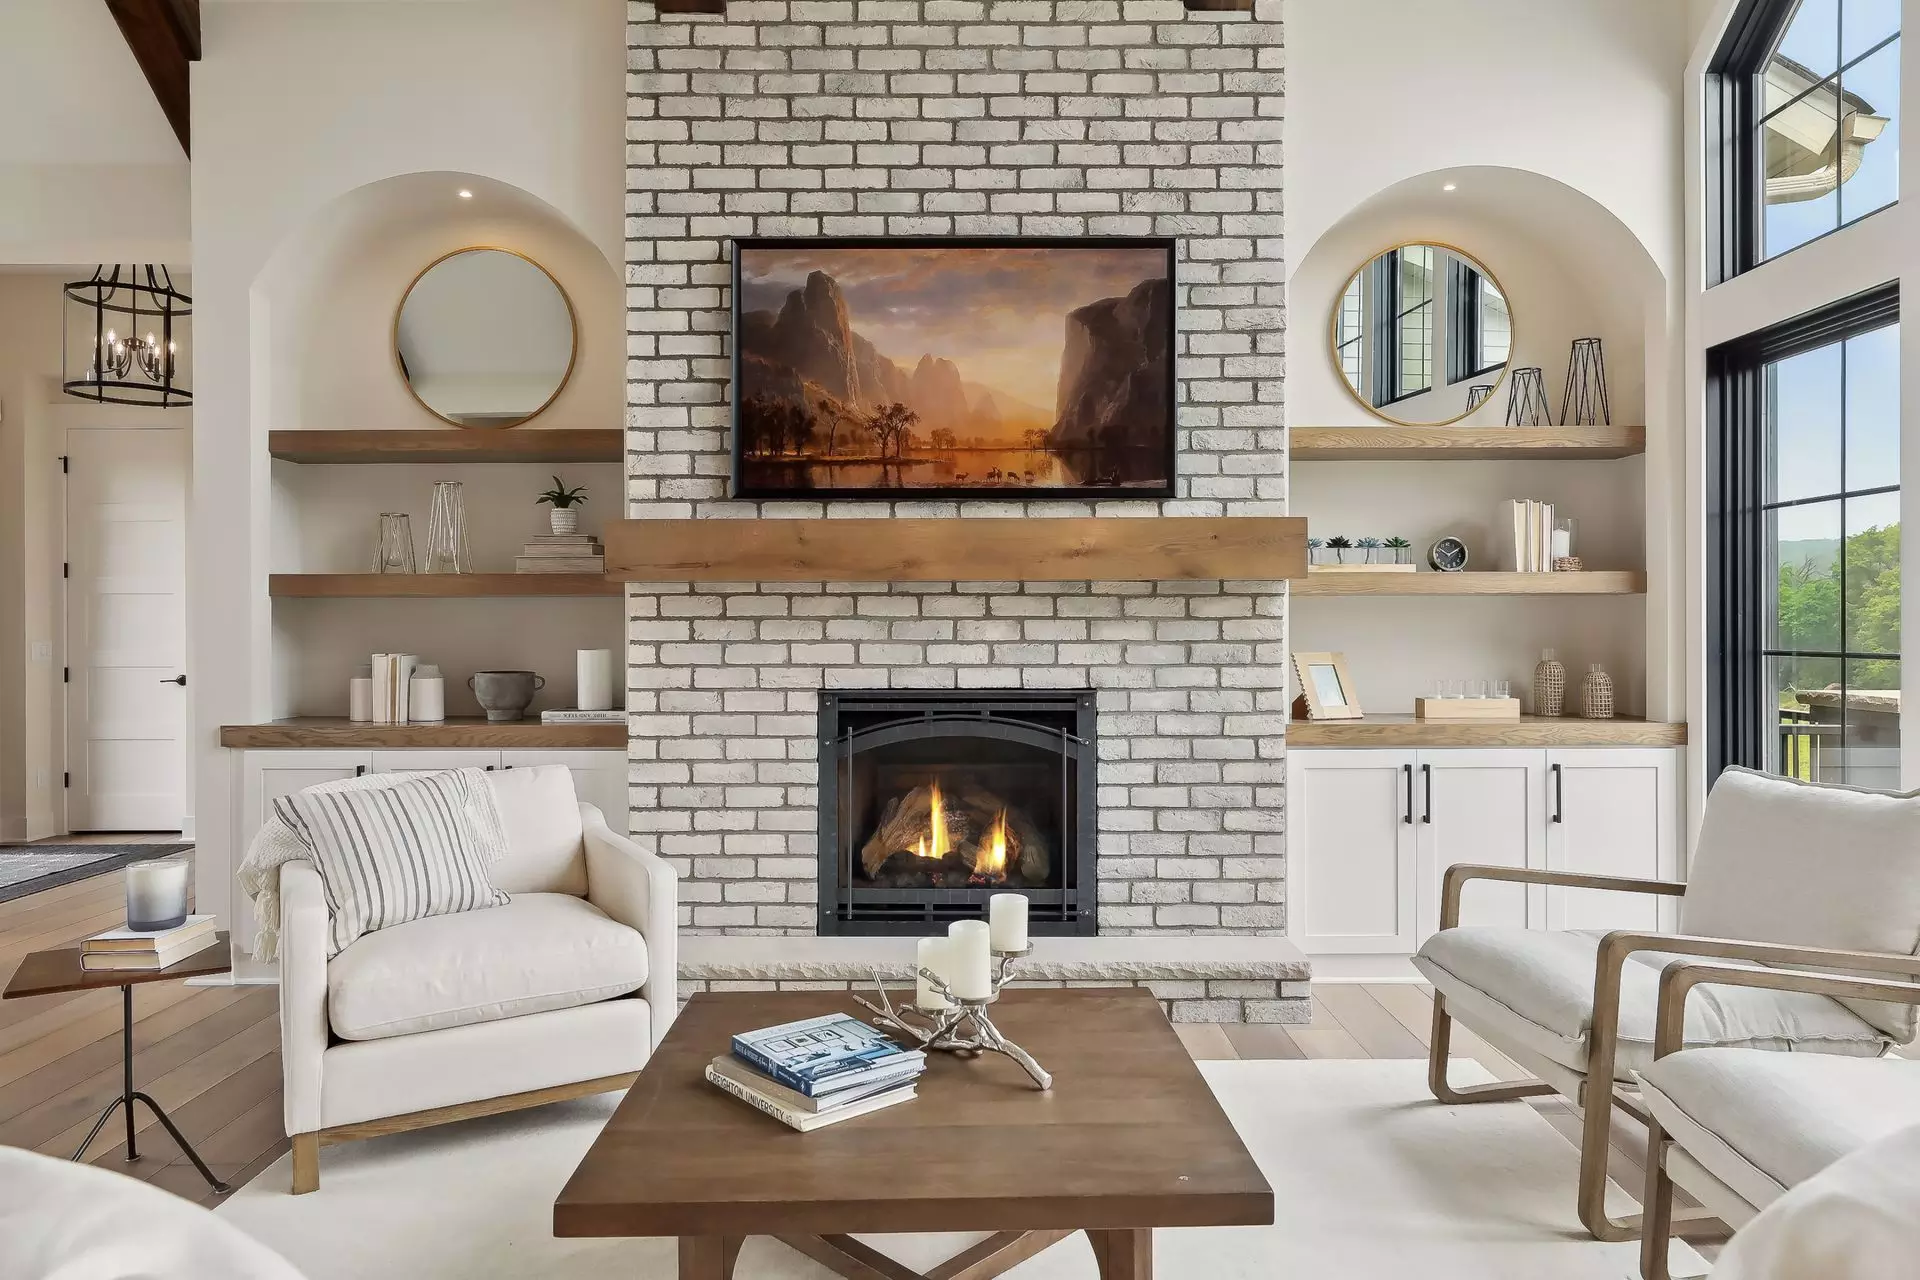 Gas fireplace with brick wall